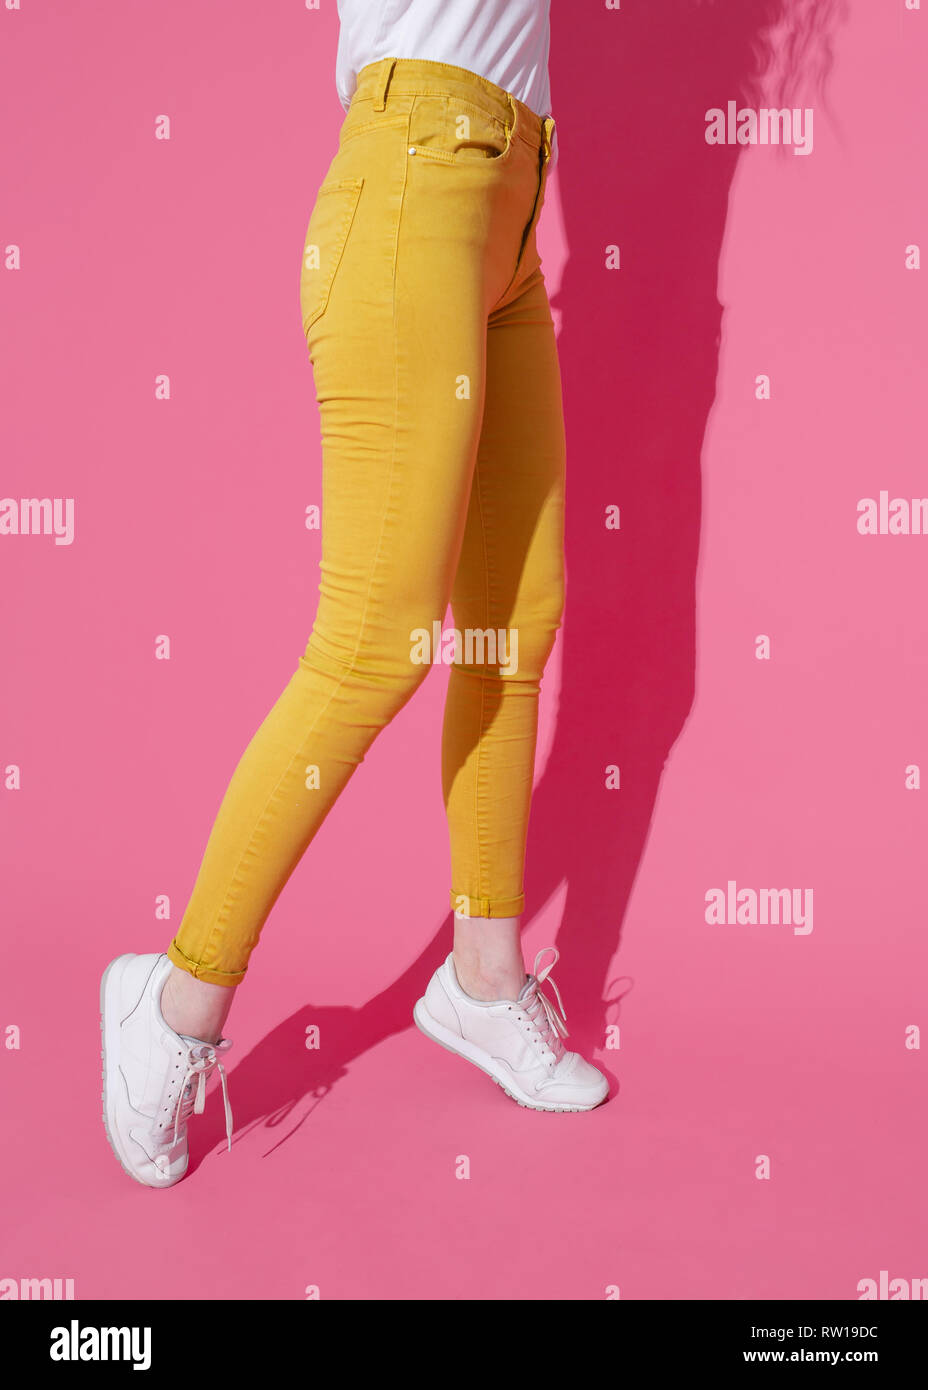 Female feet in trendy yellow jeans and white sneakers on a pink background. Stock Photo